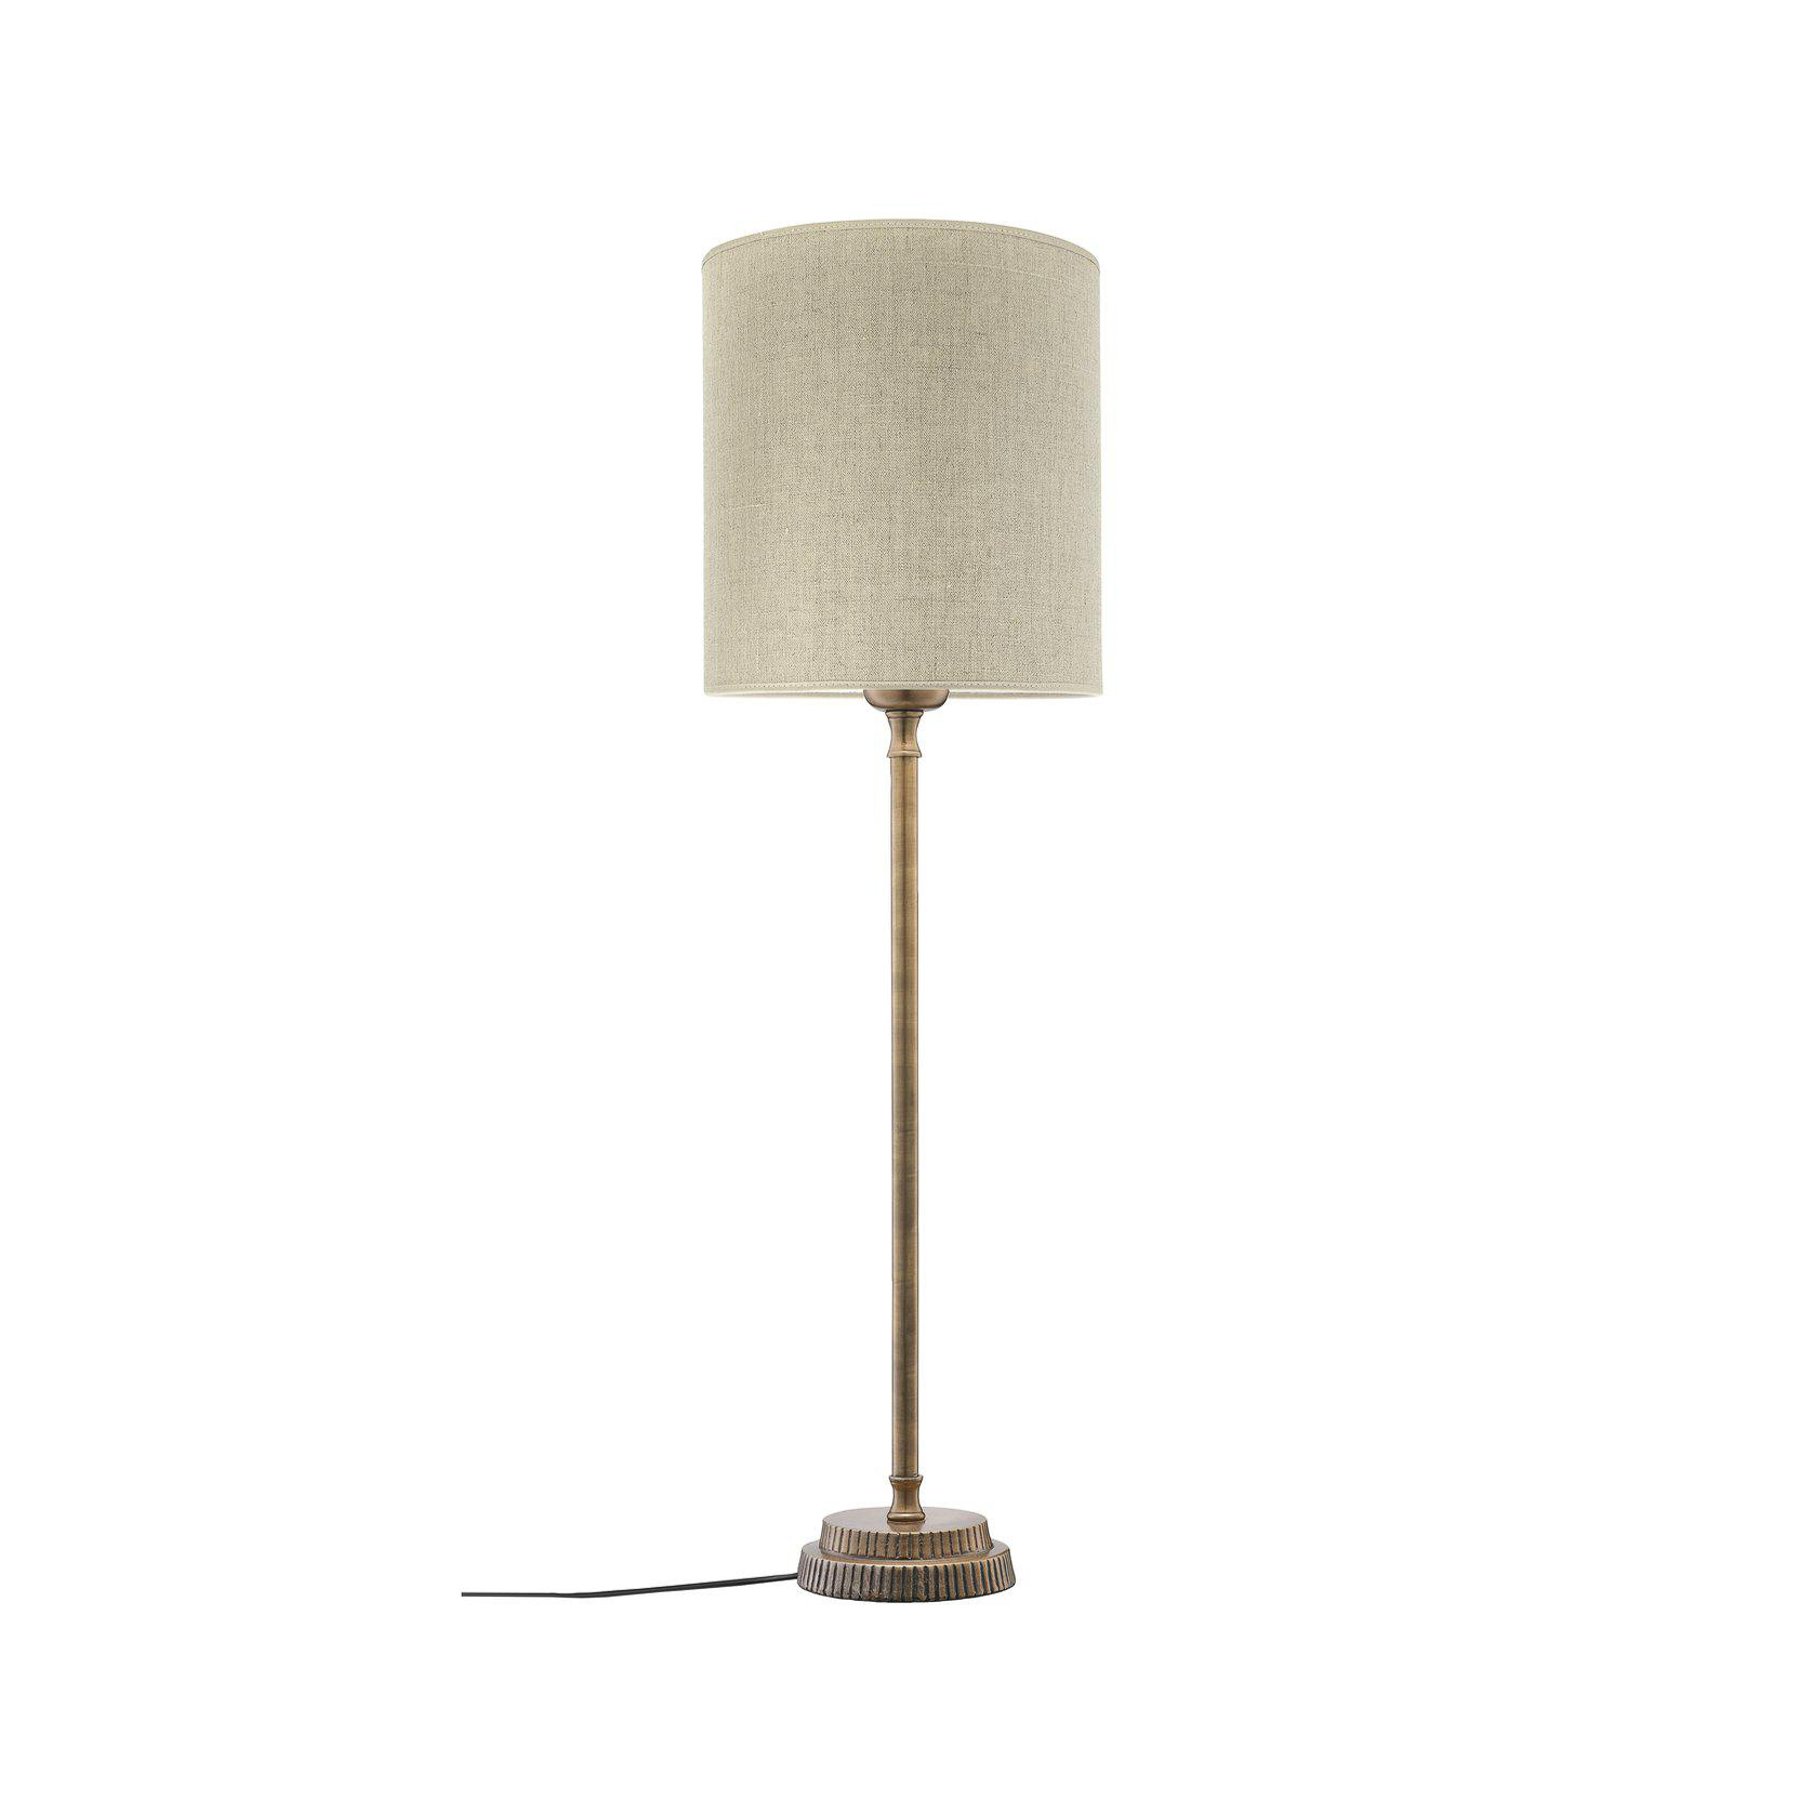 PR Home table lamp Kent beige/brass lampshade Celyn cylinder